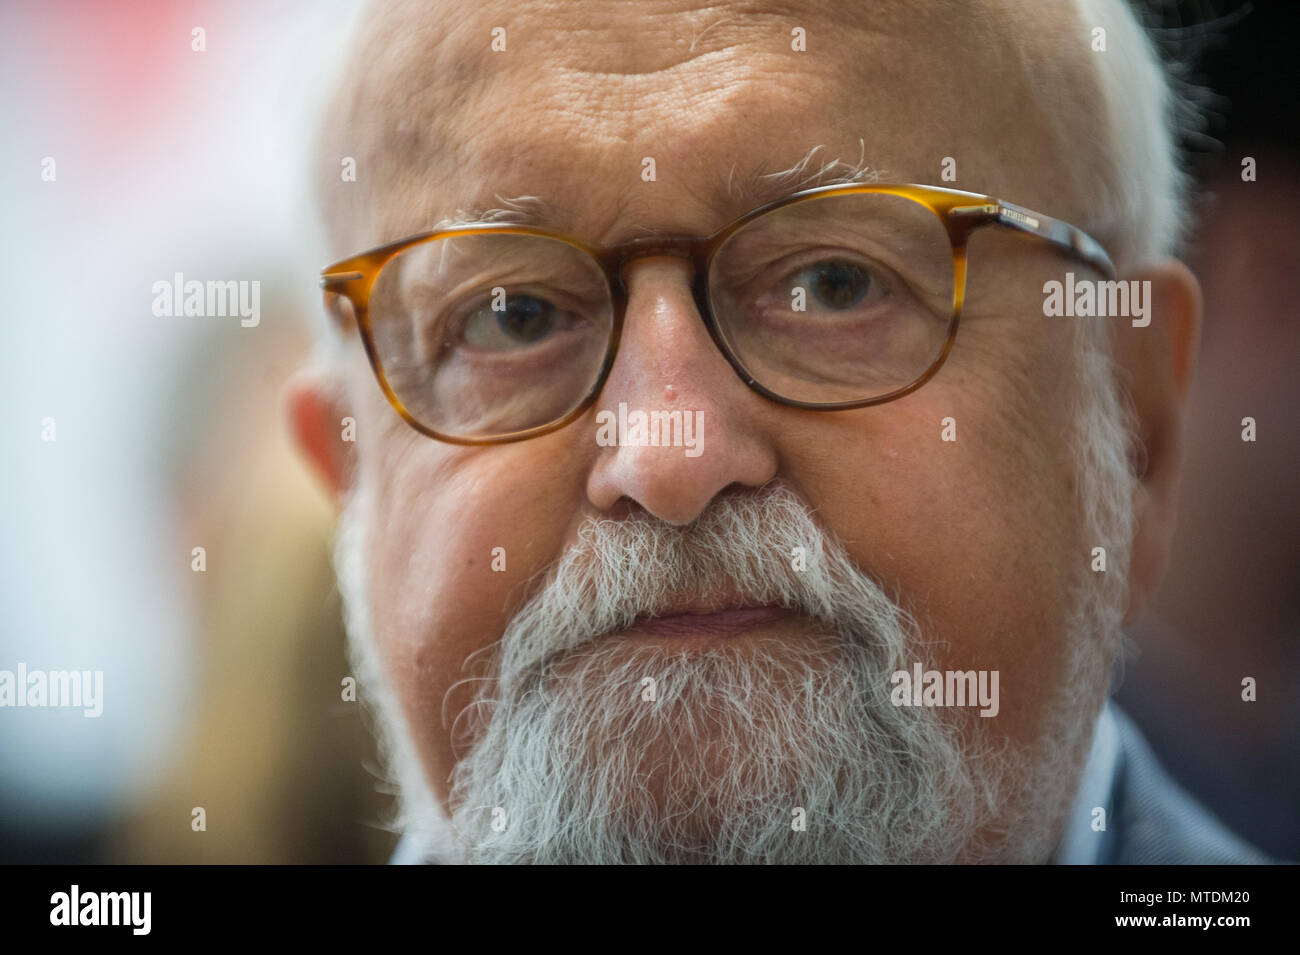 Polish Composer and Grammy Winner, Krzysztof Penderecki attends a press conference during the 11st Film Music Festival in Krakow. Stock Photo